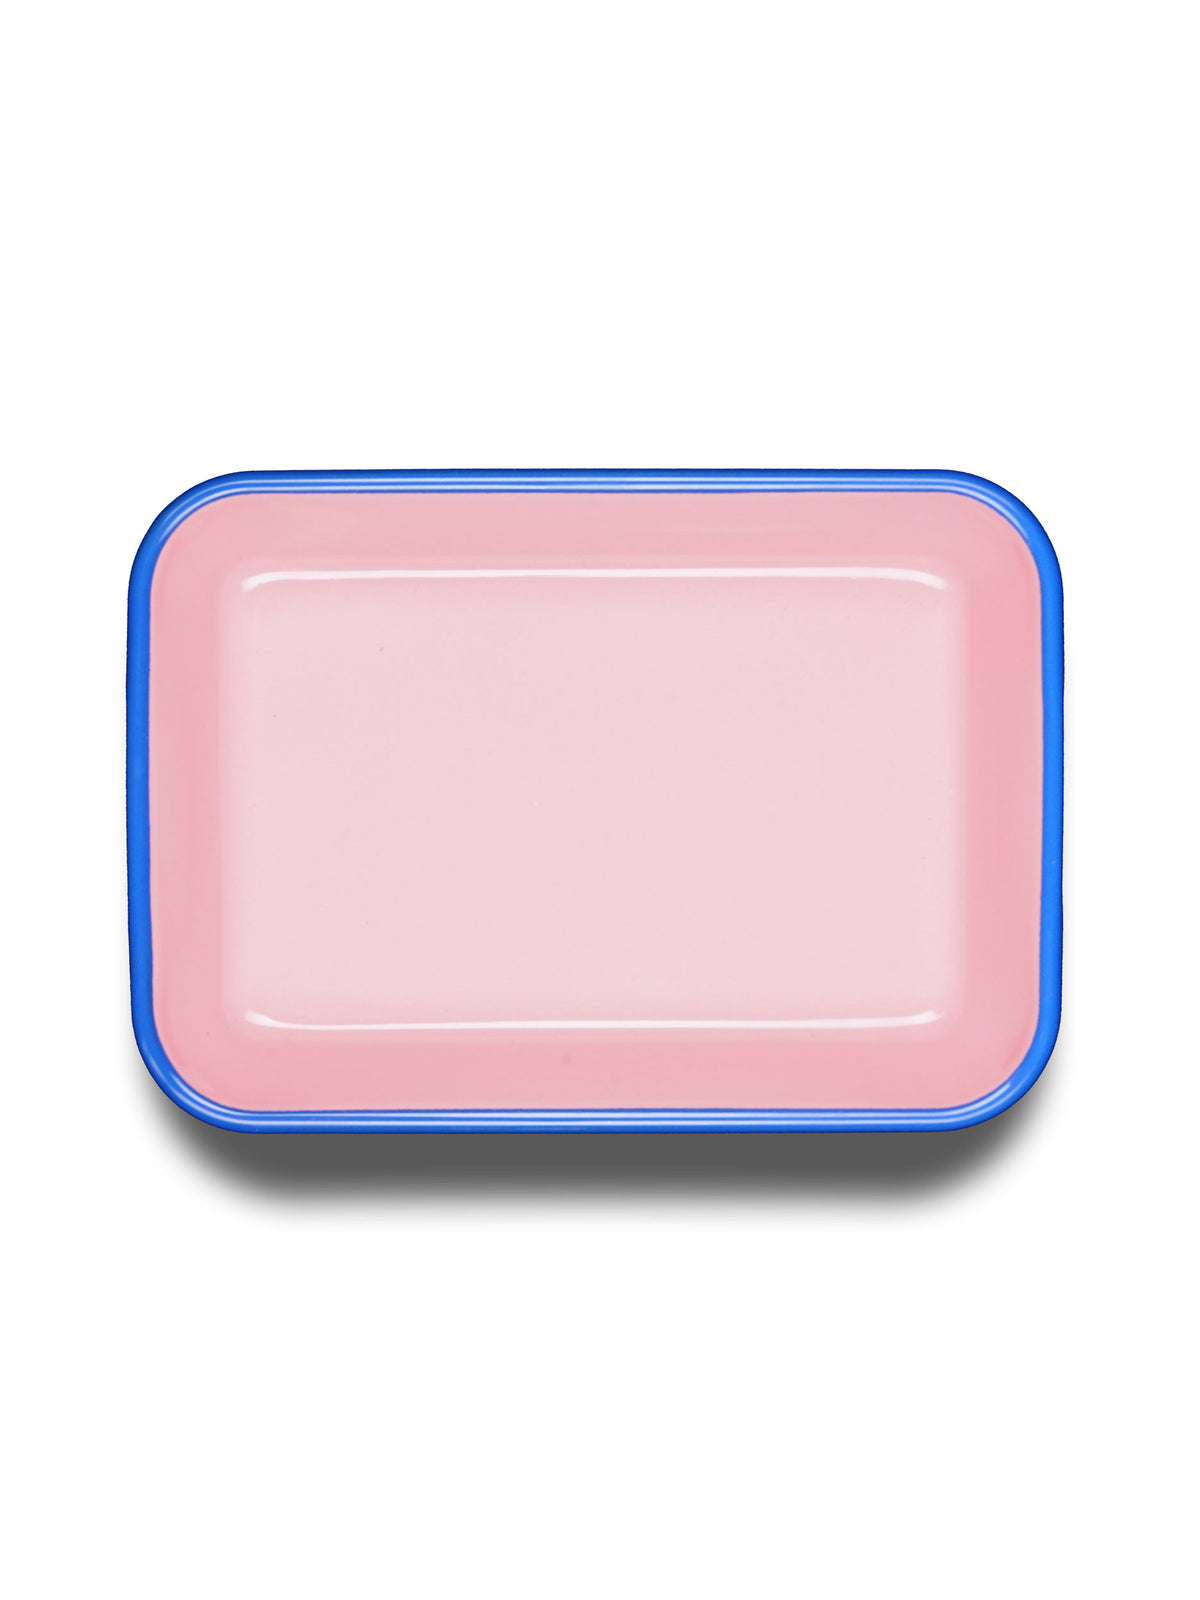 https://www.lunaandcurious.shop/wp-content/uploads/1692/29/the-pink-blue-rim-medium-enamel-baking-dish-bornn-service-is-available-at-a-fair-price-and-offers-outstanding-service-for-every-loyal-customers_0.jpg